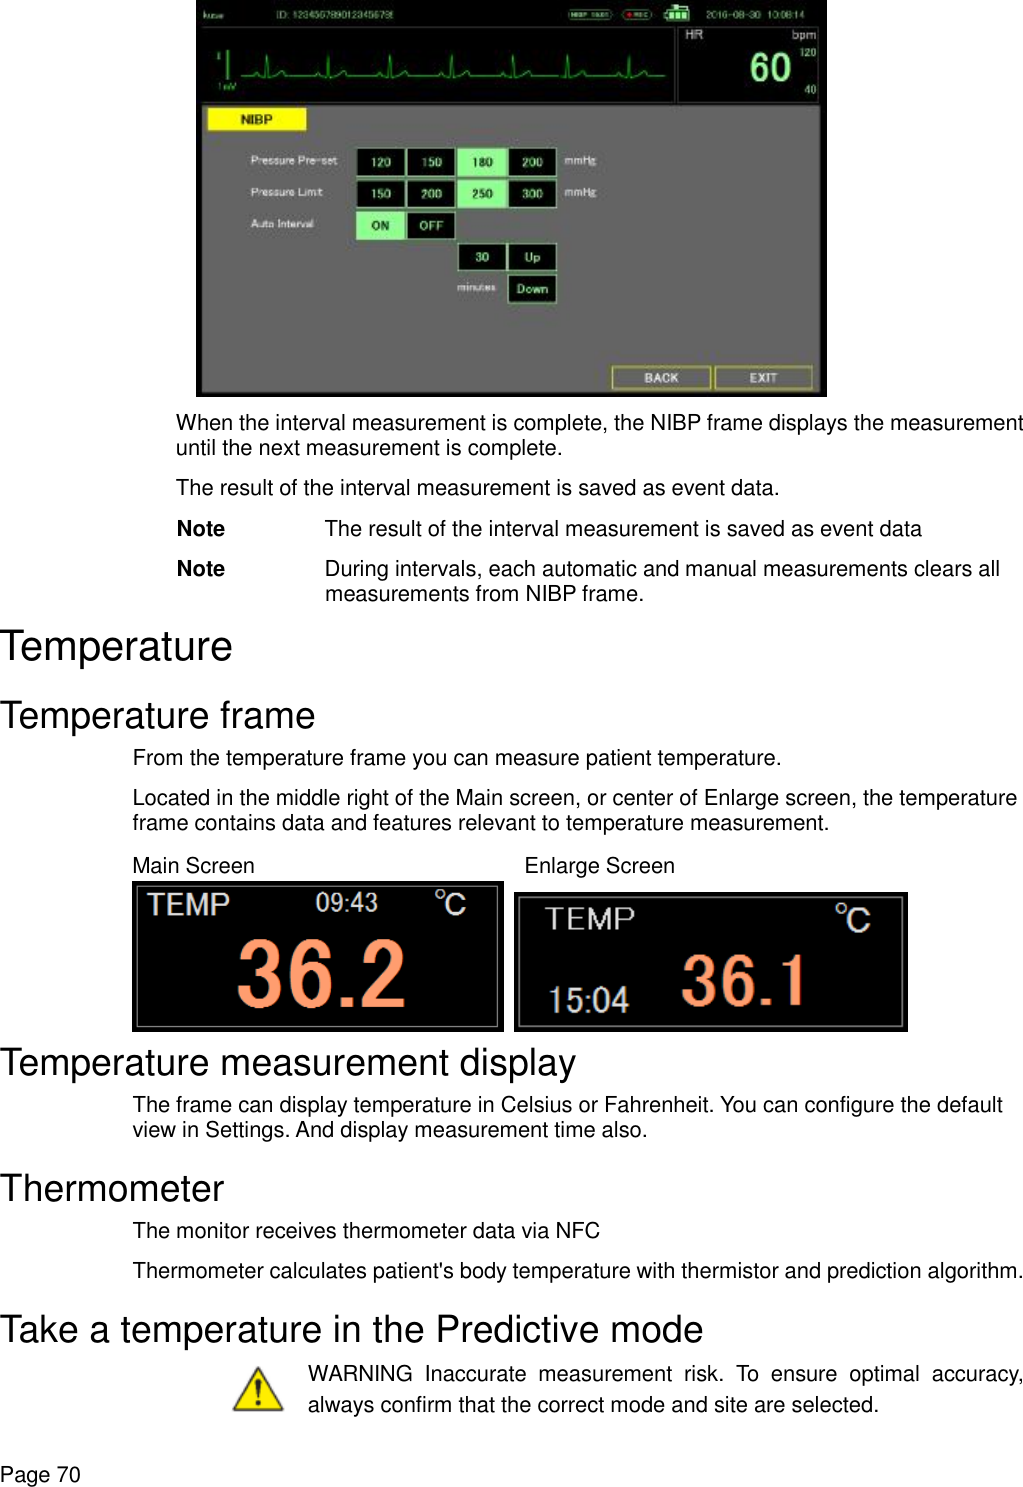    Page 70  When the interval measurement is complete, the NIBP frame displays the measurement until the next measurement is complete. The result of the interval measurement is saved as event data. Note The result of the interval measurement is saved as event data  Note During intervals, each automatic and manual measurements clears all measurements from NIBP frame. Temperature Temperature frame From the temperature frame you can measure patient temperature. Located in the middle right of the Main screen, or center of Enlarge screen, the temperature frame contains data and features relevant to temperature measurement. Main Screen    Enlarge Screen    Temperature measurement display The frame can display temperature in Celsius or Fahrenheit. You can configure the default view in Settings. And display measurement time also. Thermometer The monitor receives thermometer data via NFC Thermometer calculates patient&apos;s body temperature with thermistor and prediction algorithm. Take a temperature in the Predictive mode  WARNING Inaccurate measurement risk. To ensure optimal accuracy, always confirm that the correct mode and site are selected. 